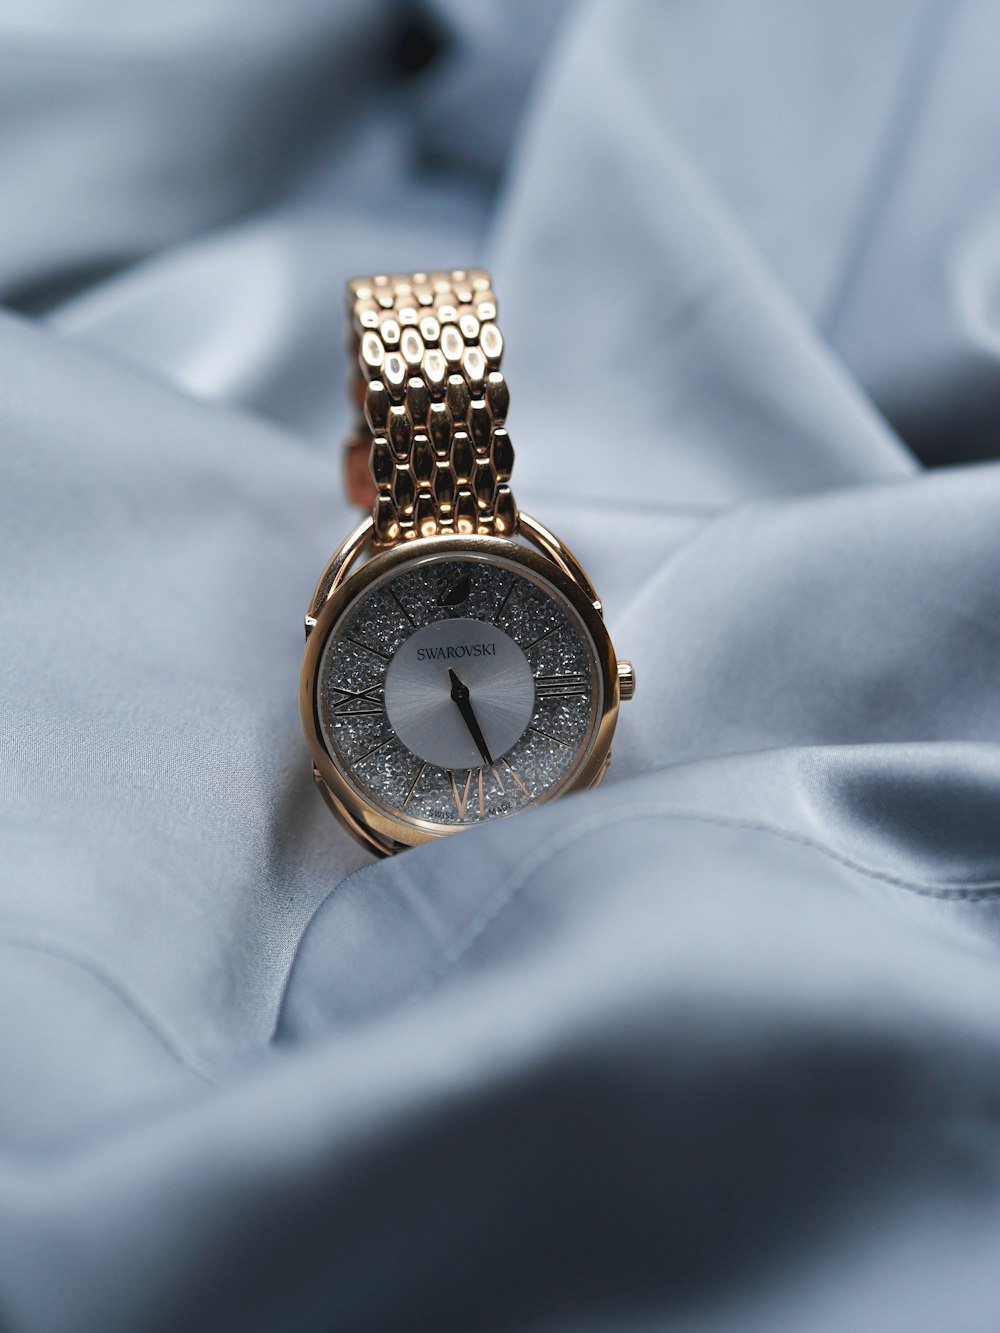 gold and silver round analog watch